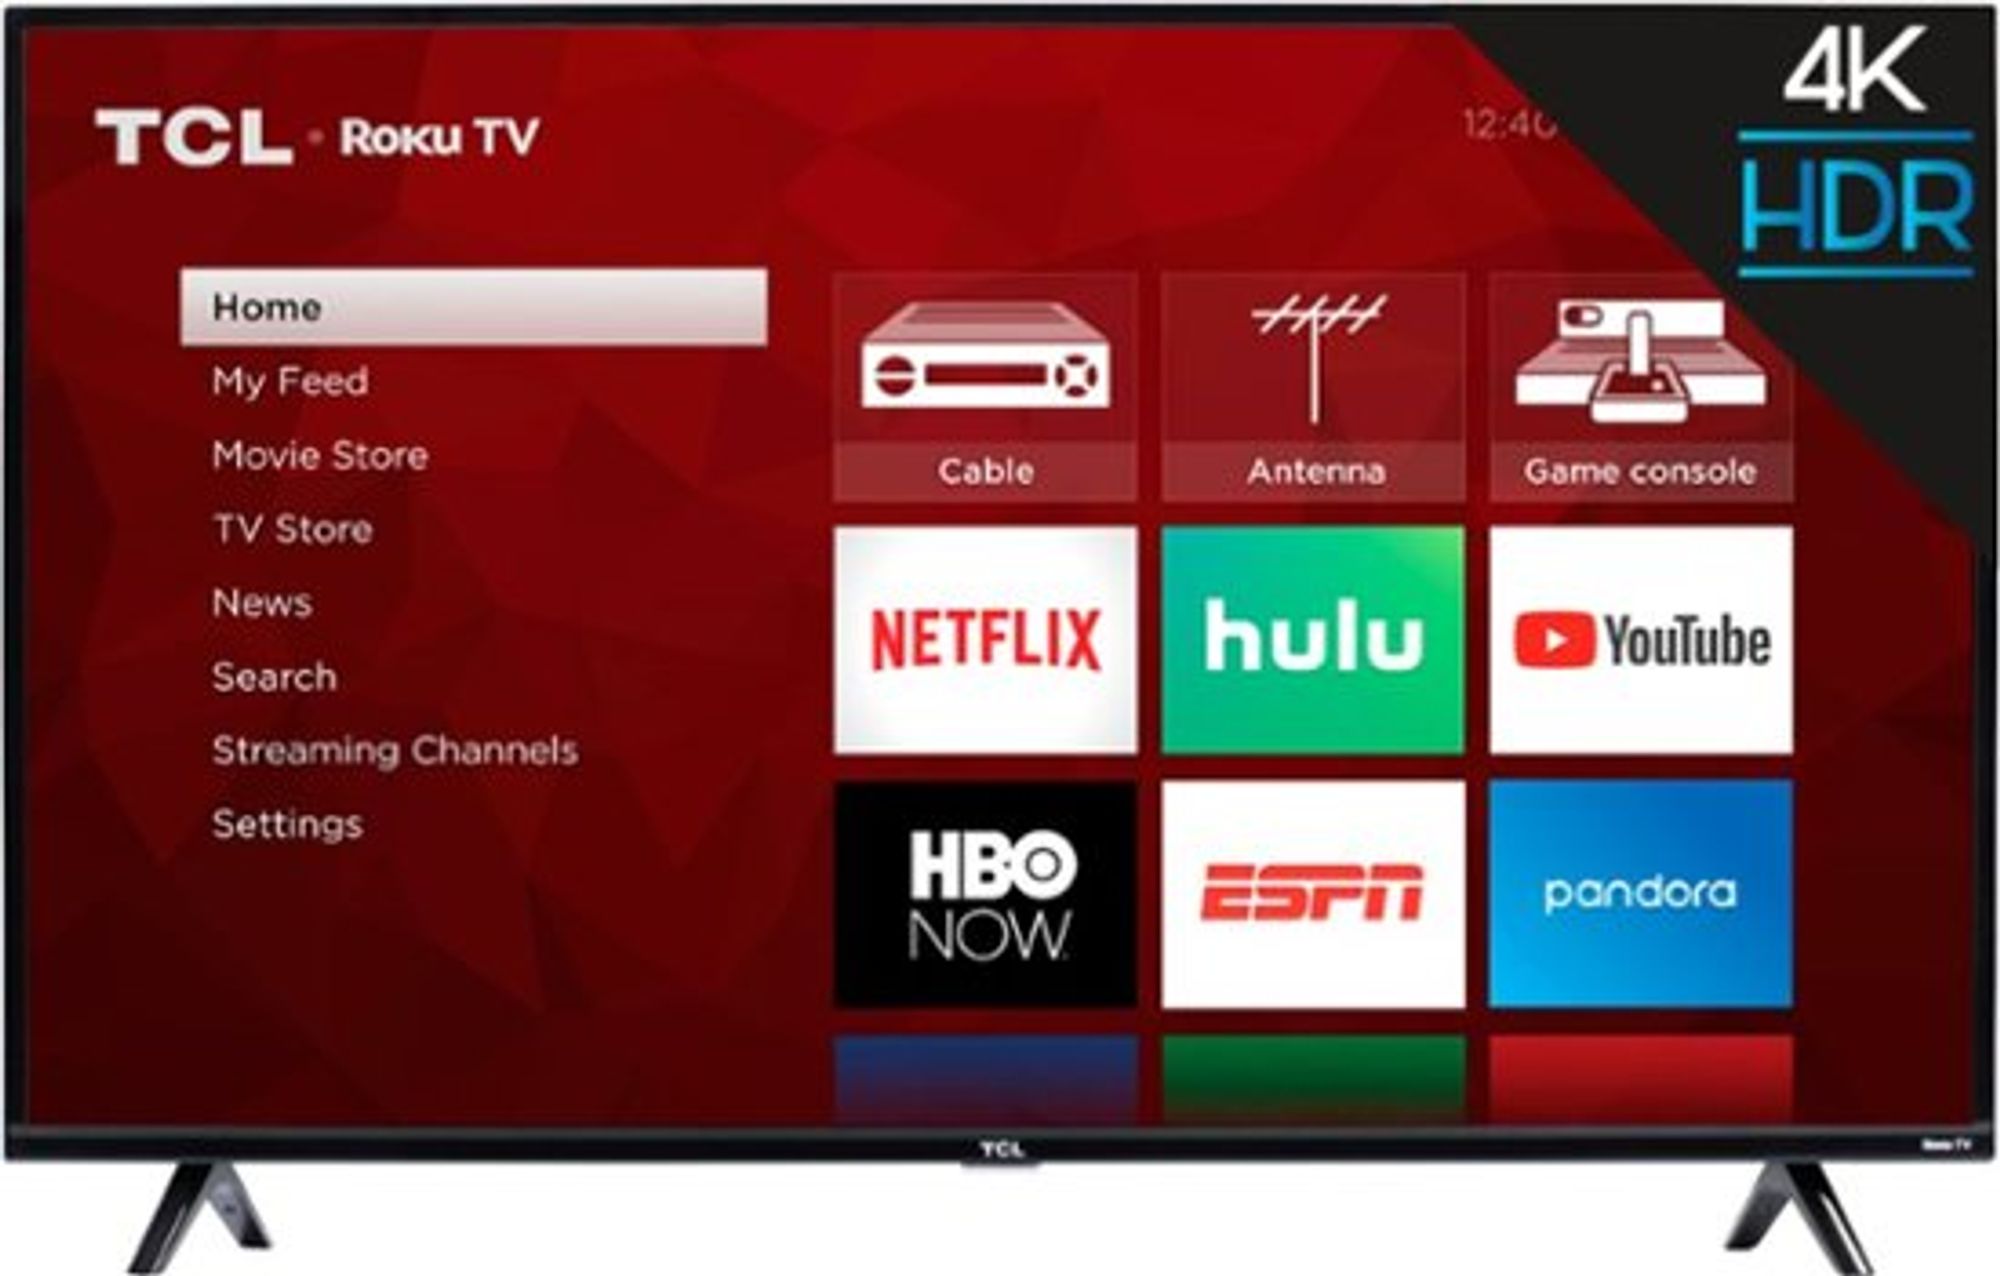 50" TCL 4K Roku TV with HDR